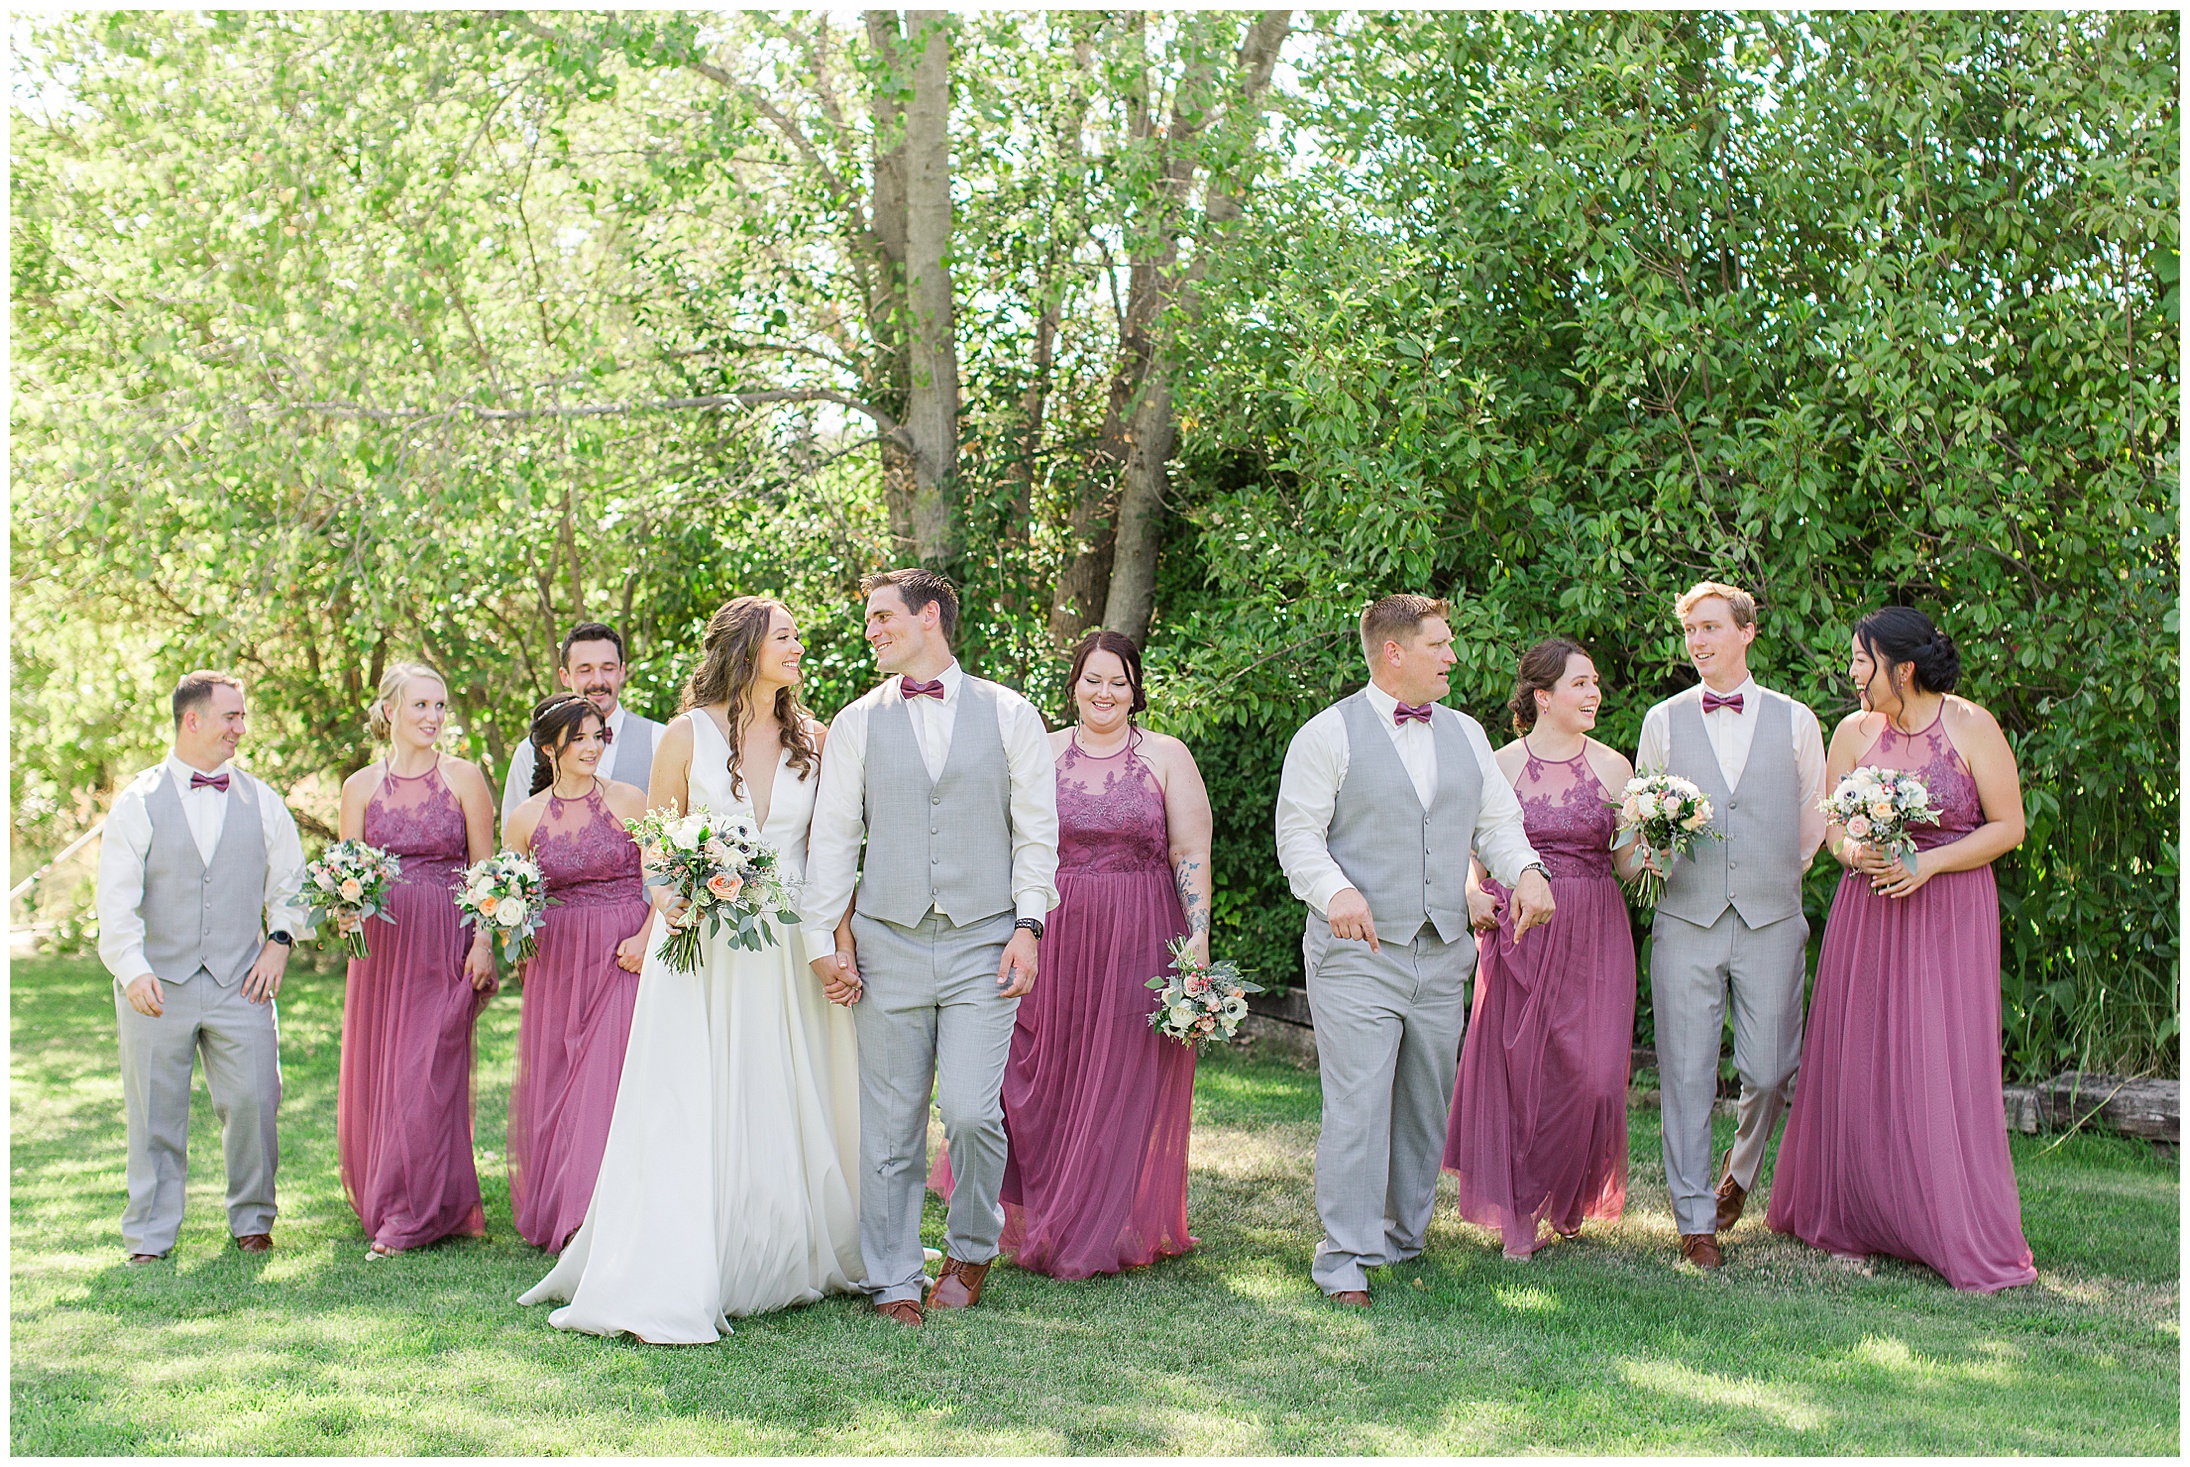 White Ranch Events Wedding Chico California August Chianti Donkey Willow Tree,